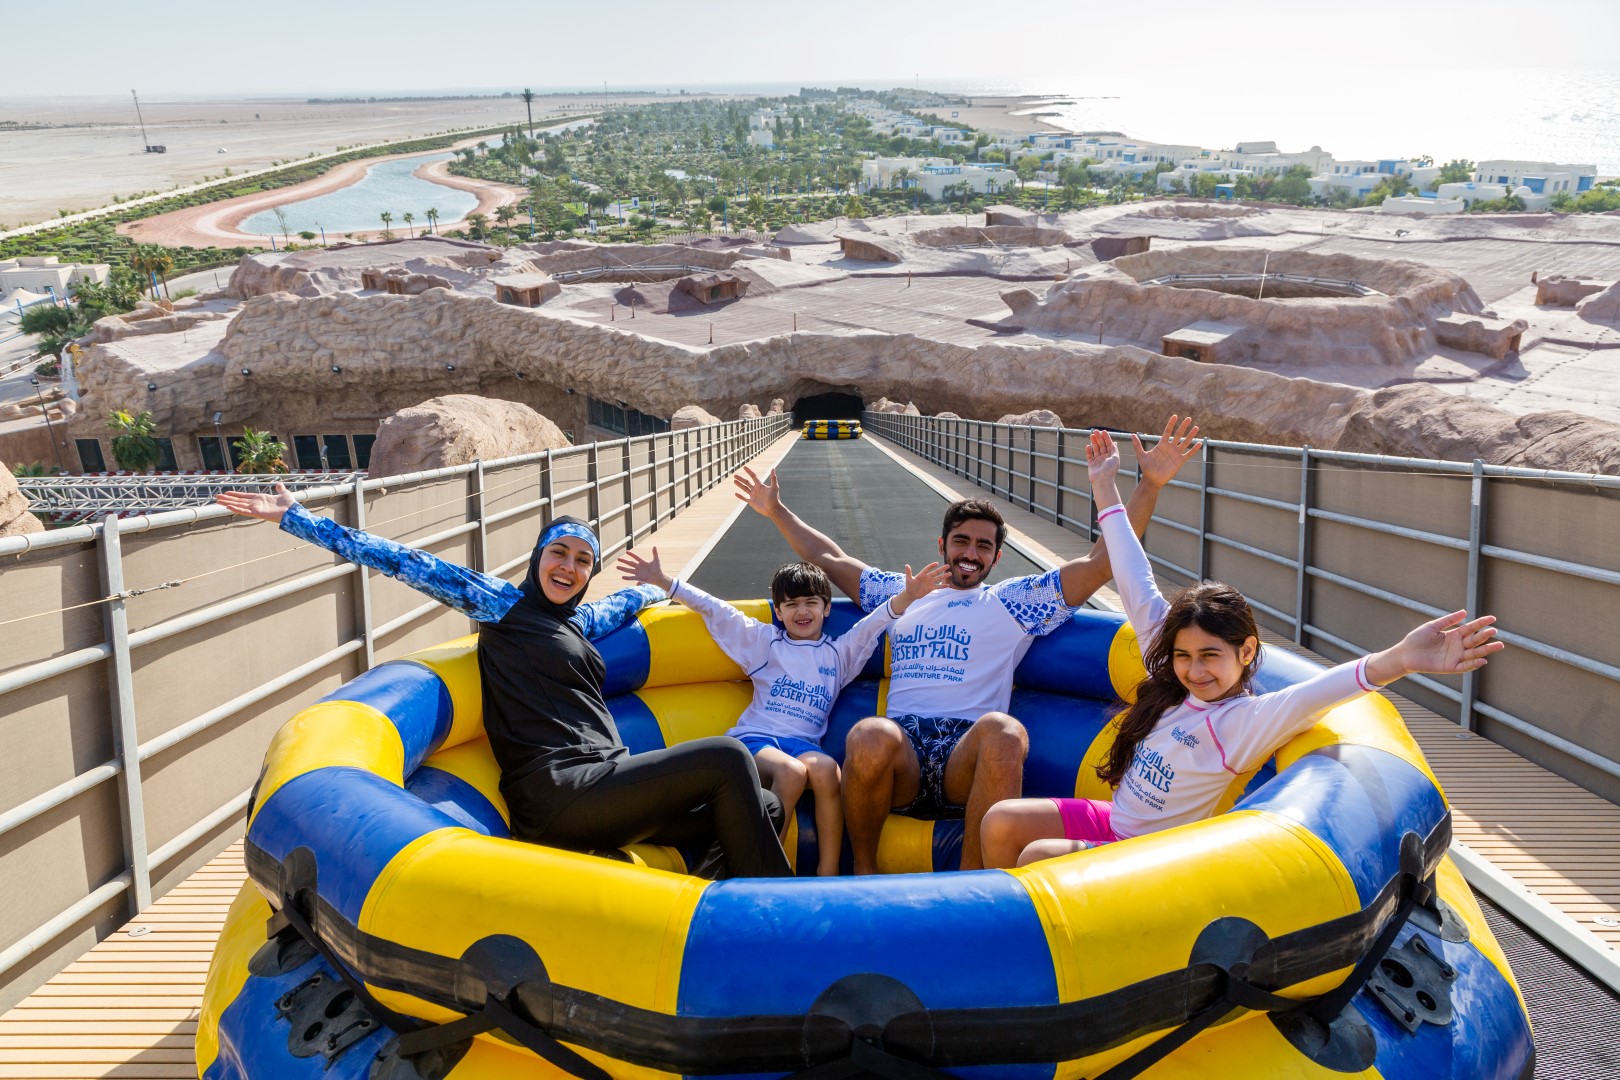 A Middle Eastern family of four on the conveyor of a Spinning Rapids Ride in Qatar